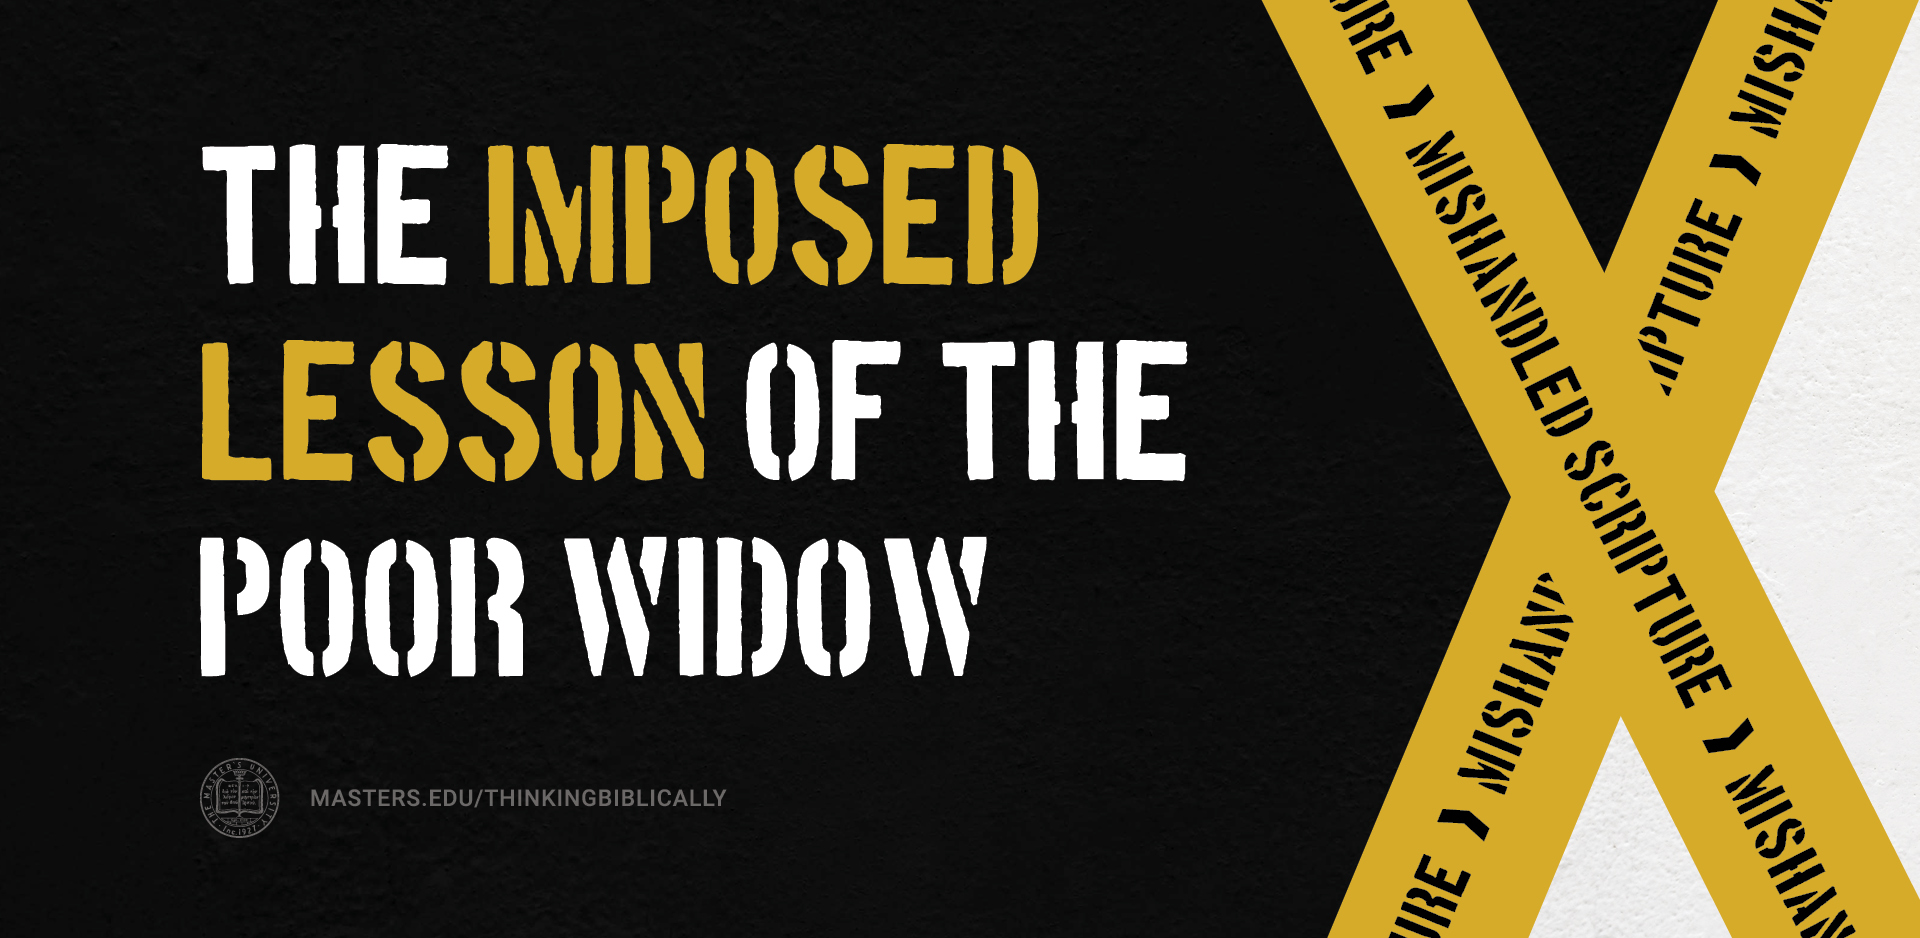 The Imposed Lesson of the Poor Widow Featured Image